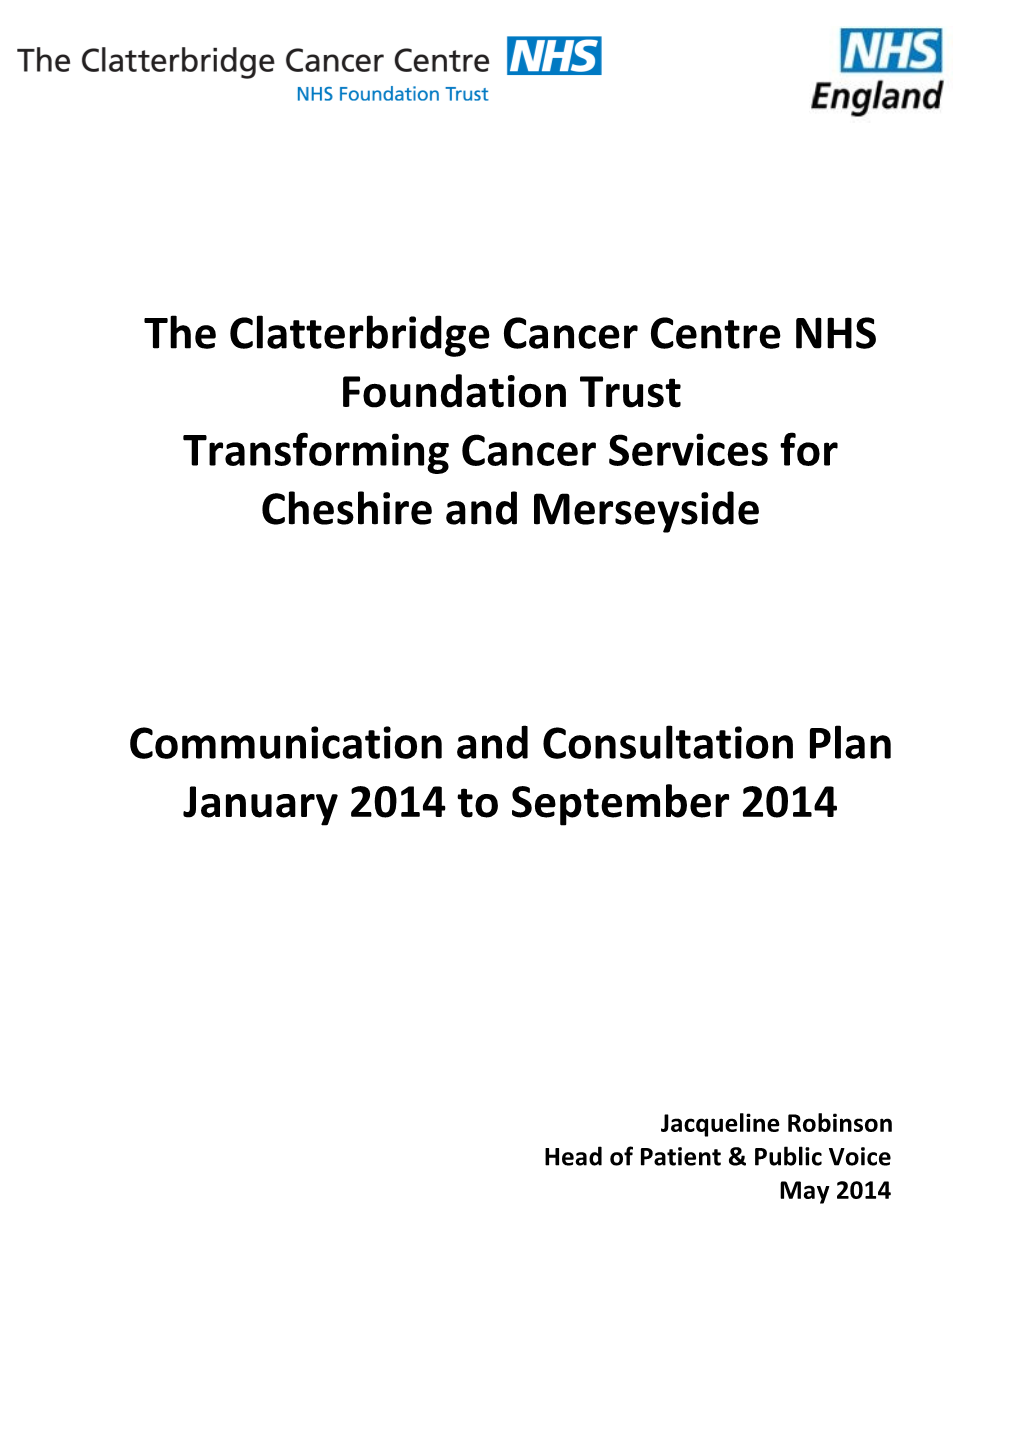 The Clatterbridge Cancer Centre NHS Foundation Trust Transforming Cancer Services for Cheshire and Merseyside Communication